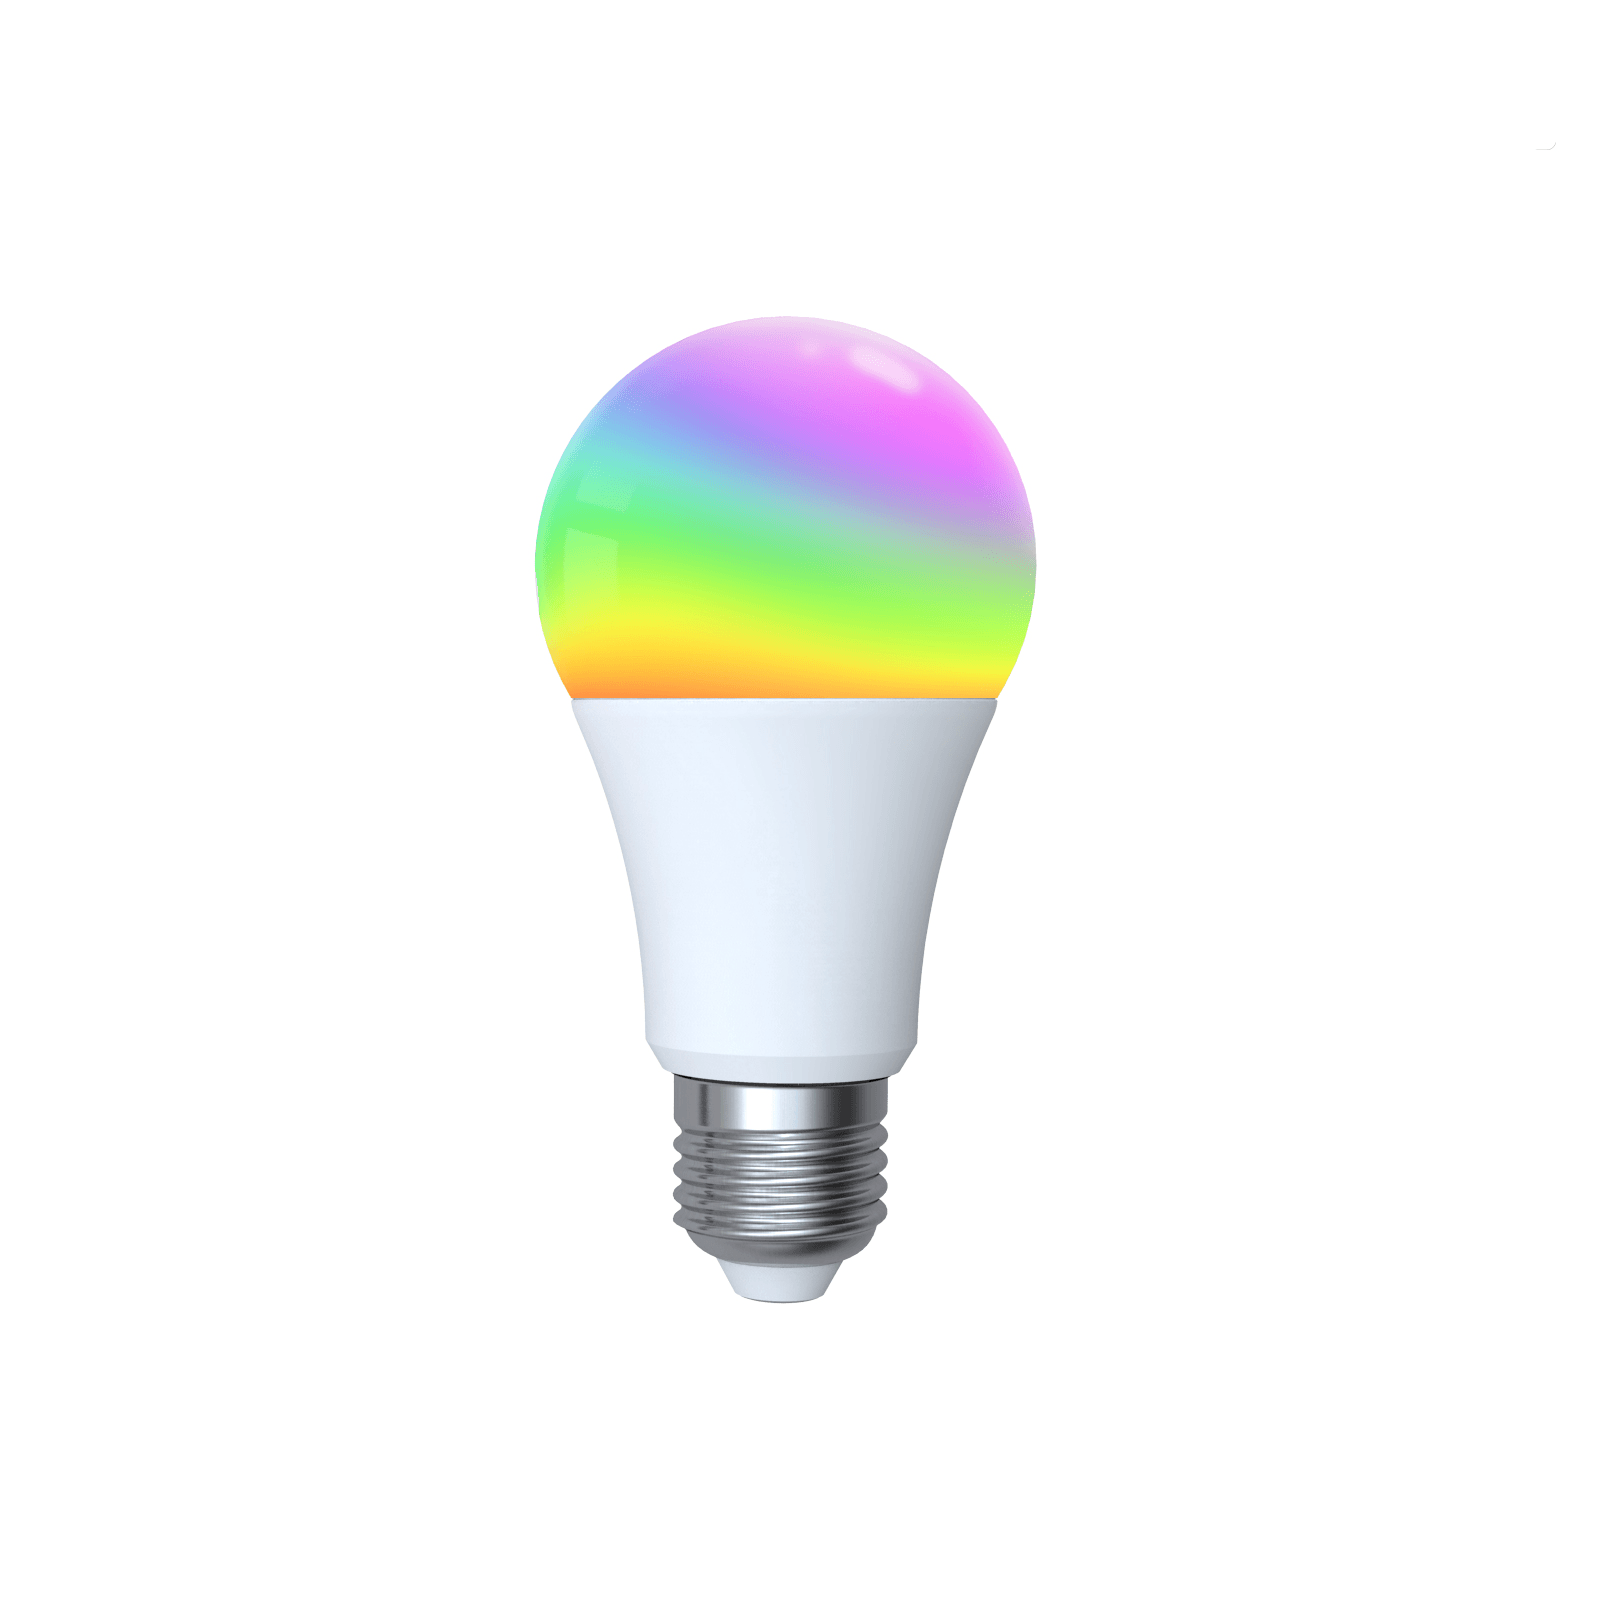 ærme Inficere Ombord MOES WiFi Smart LED Light Bulb Dimmable Lamp 14W RGB E27 Color Changea